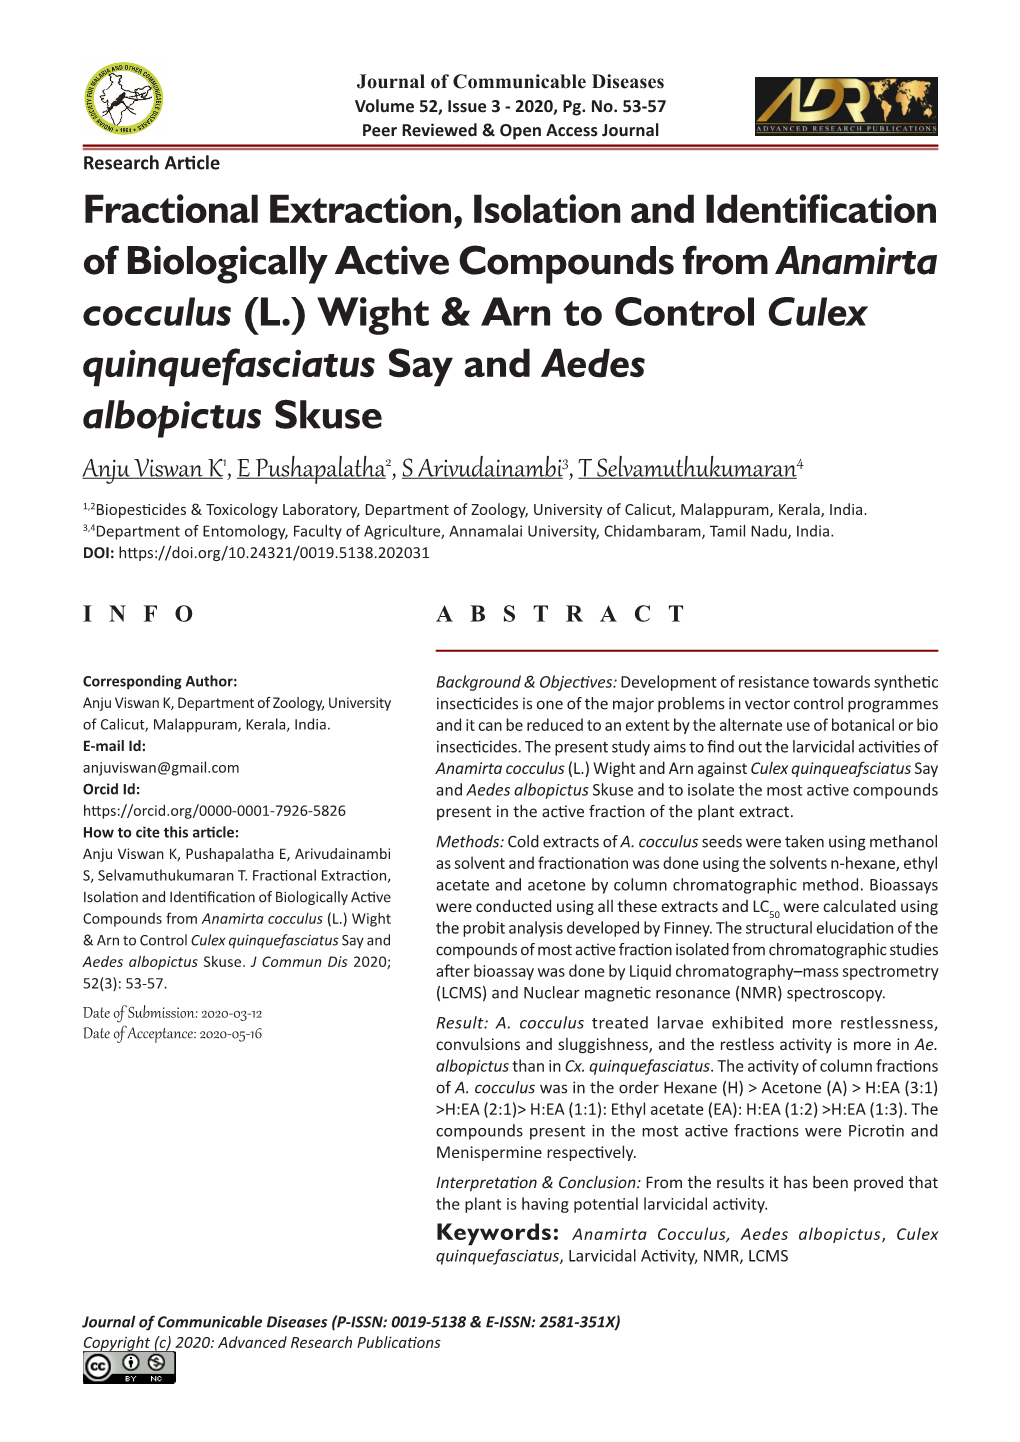 Fractional Extraction, Isolation and Identification of Biologically Active Compounds from Anamirta Cocculus